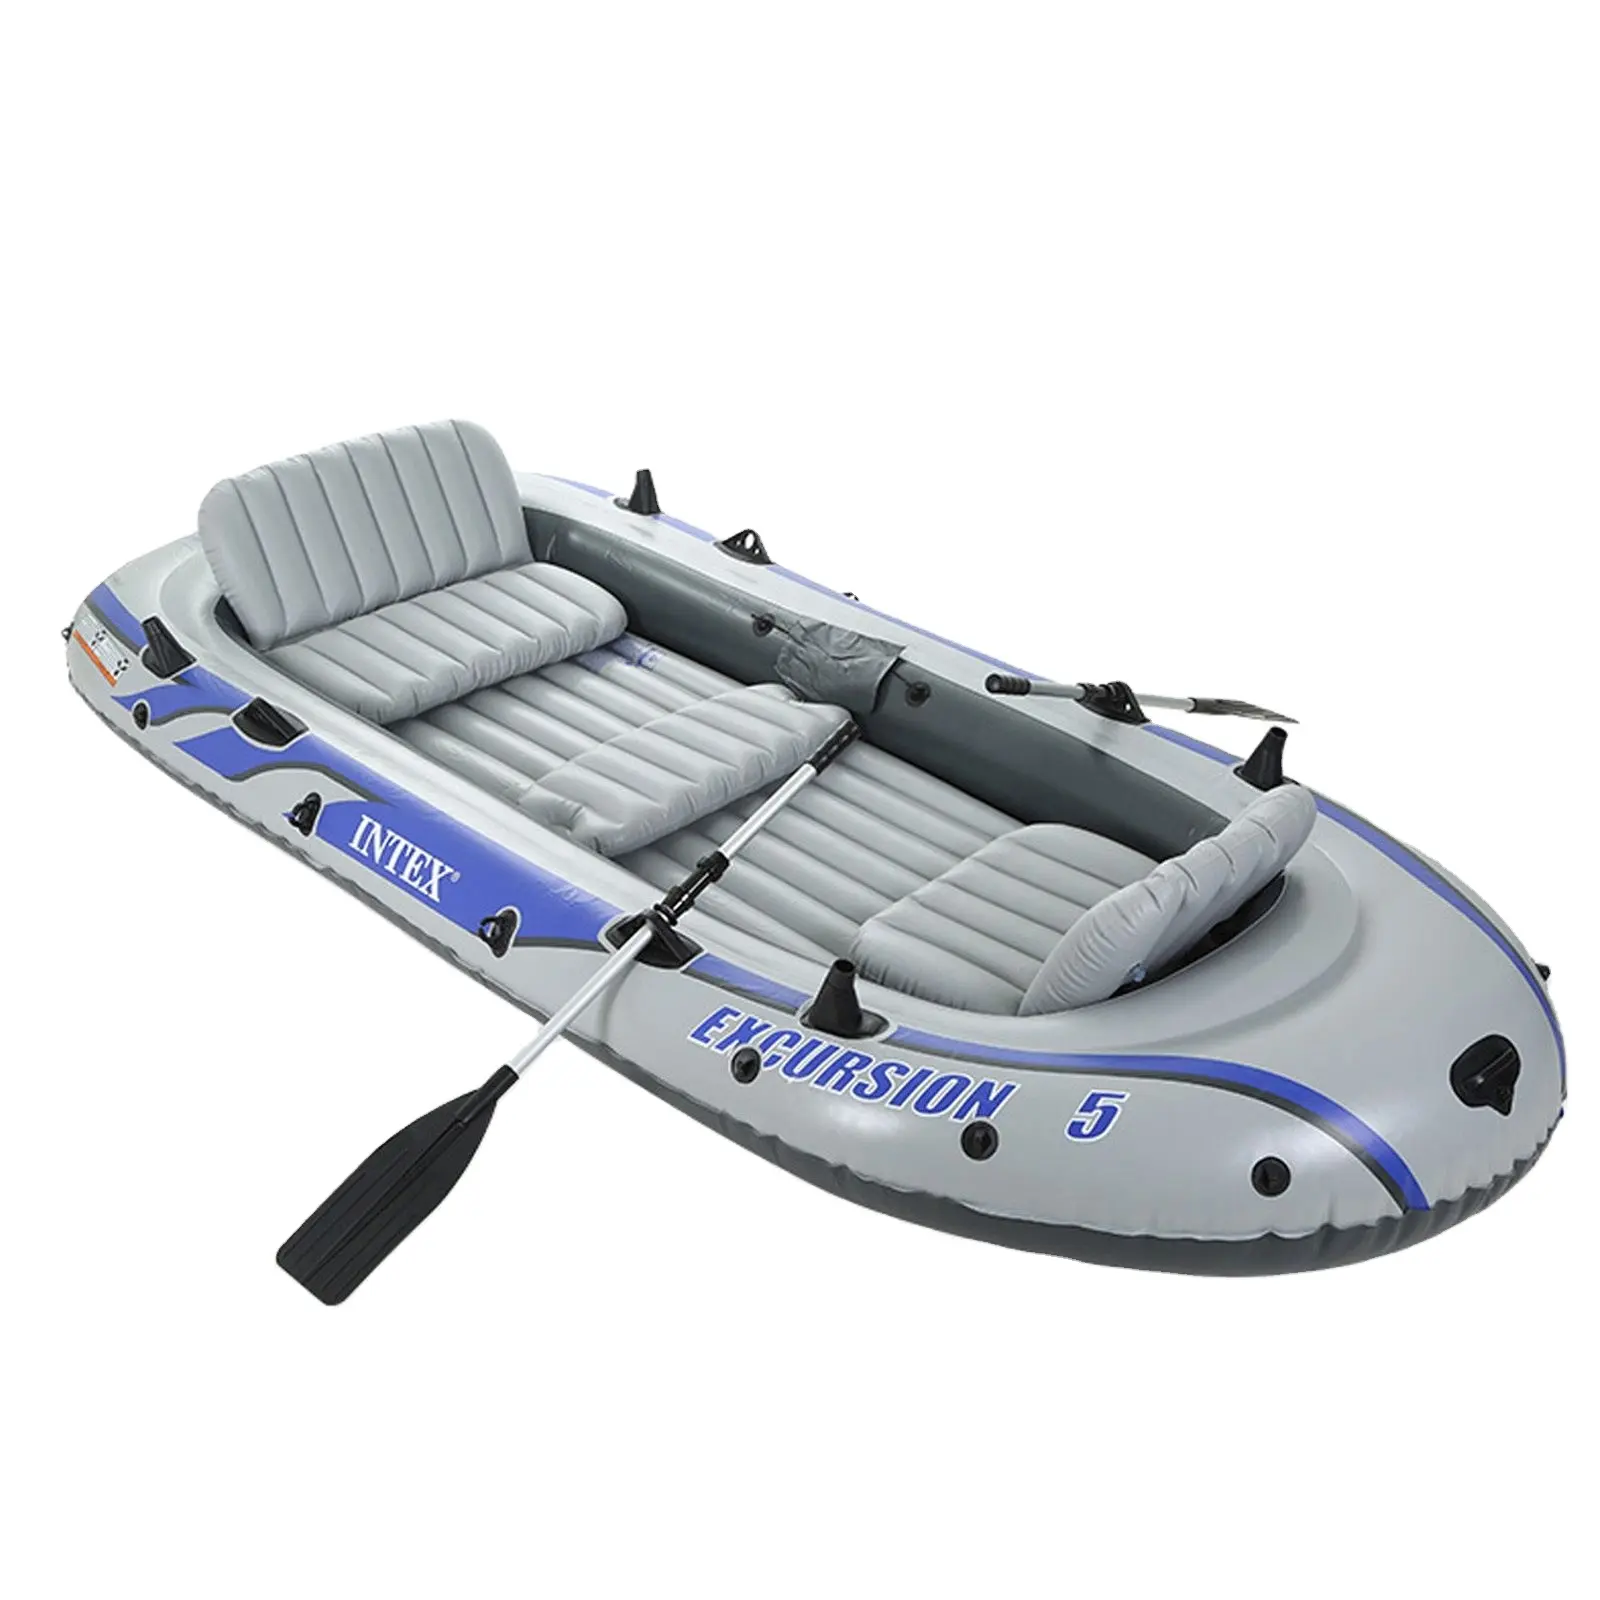 Original INTEX Excursion 5 Boat Five Person 68325 Inflatable Rowing Boats PVC Kayak Color Box Packing Set With Pump Oars Bag